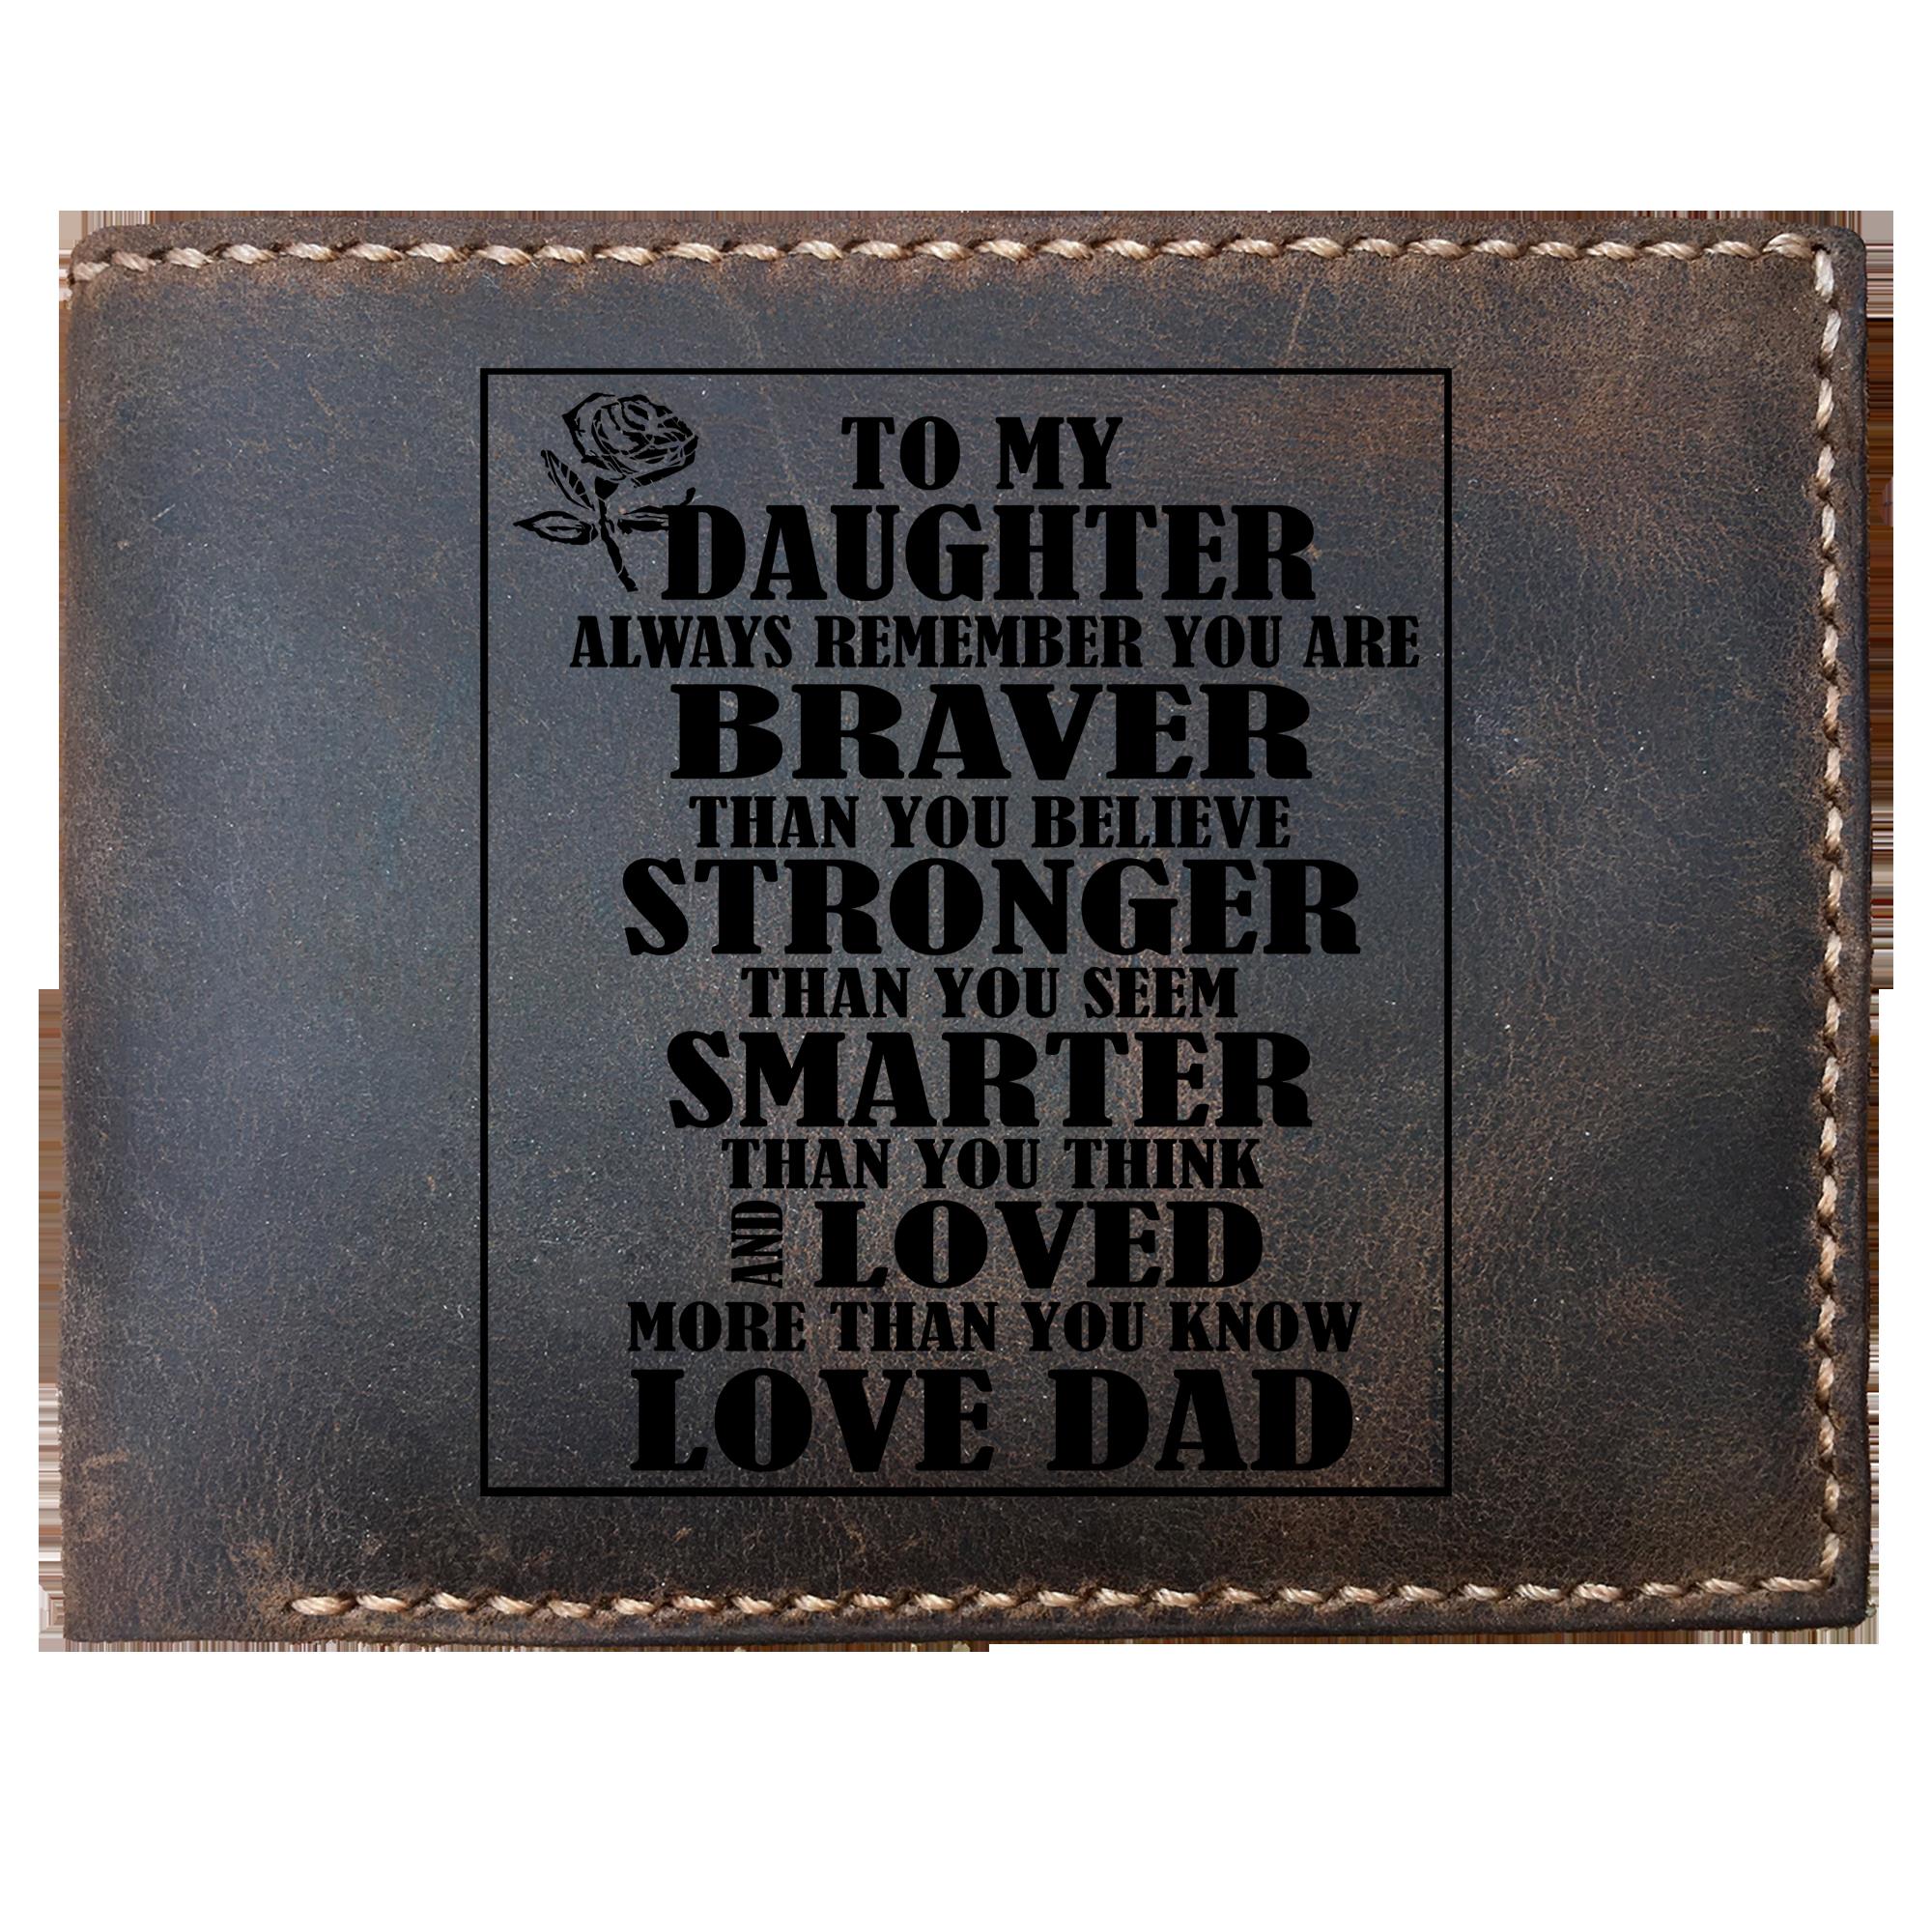 Skitongifts Funny Custom Laser Engraved Bifold Leather Wallet For Men, To My Daughter